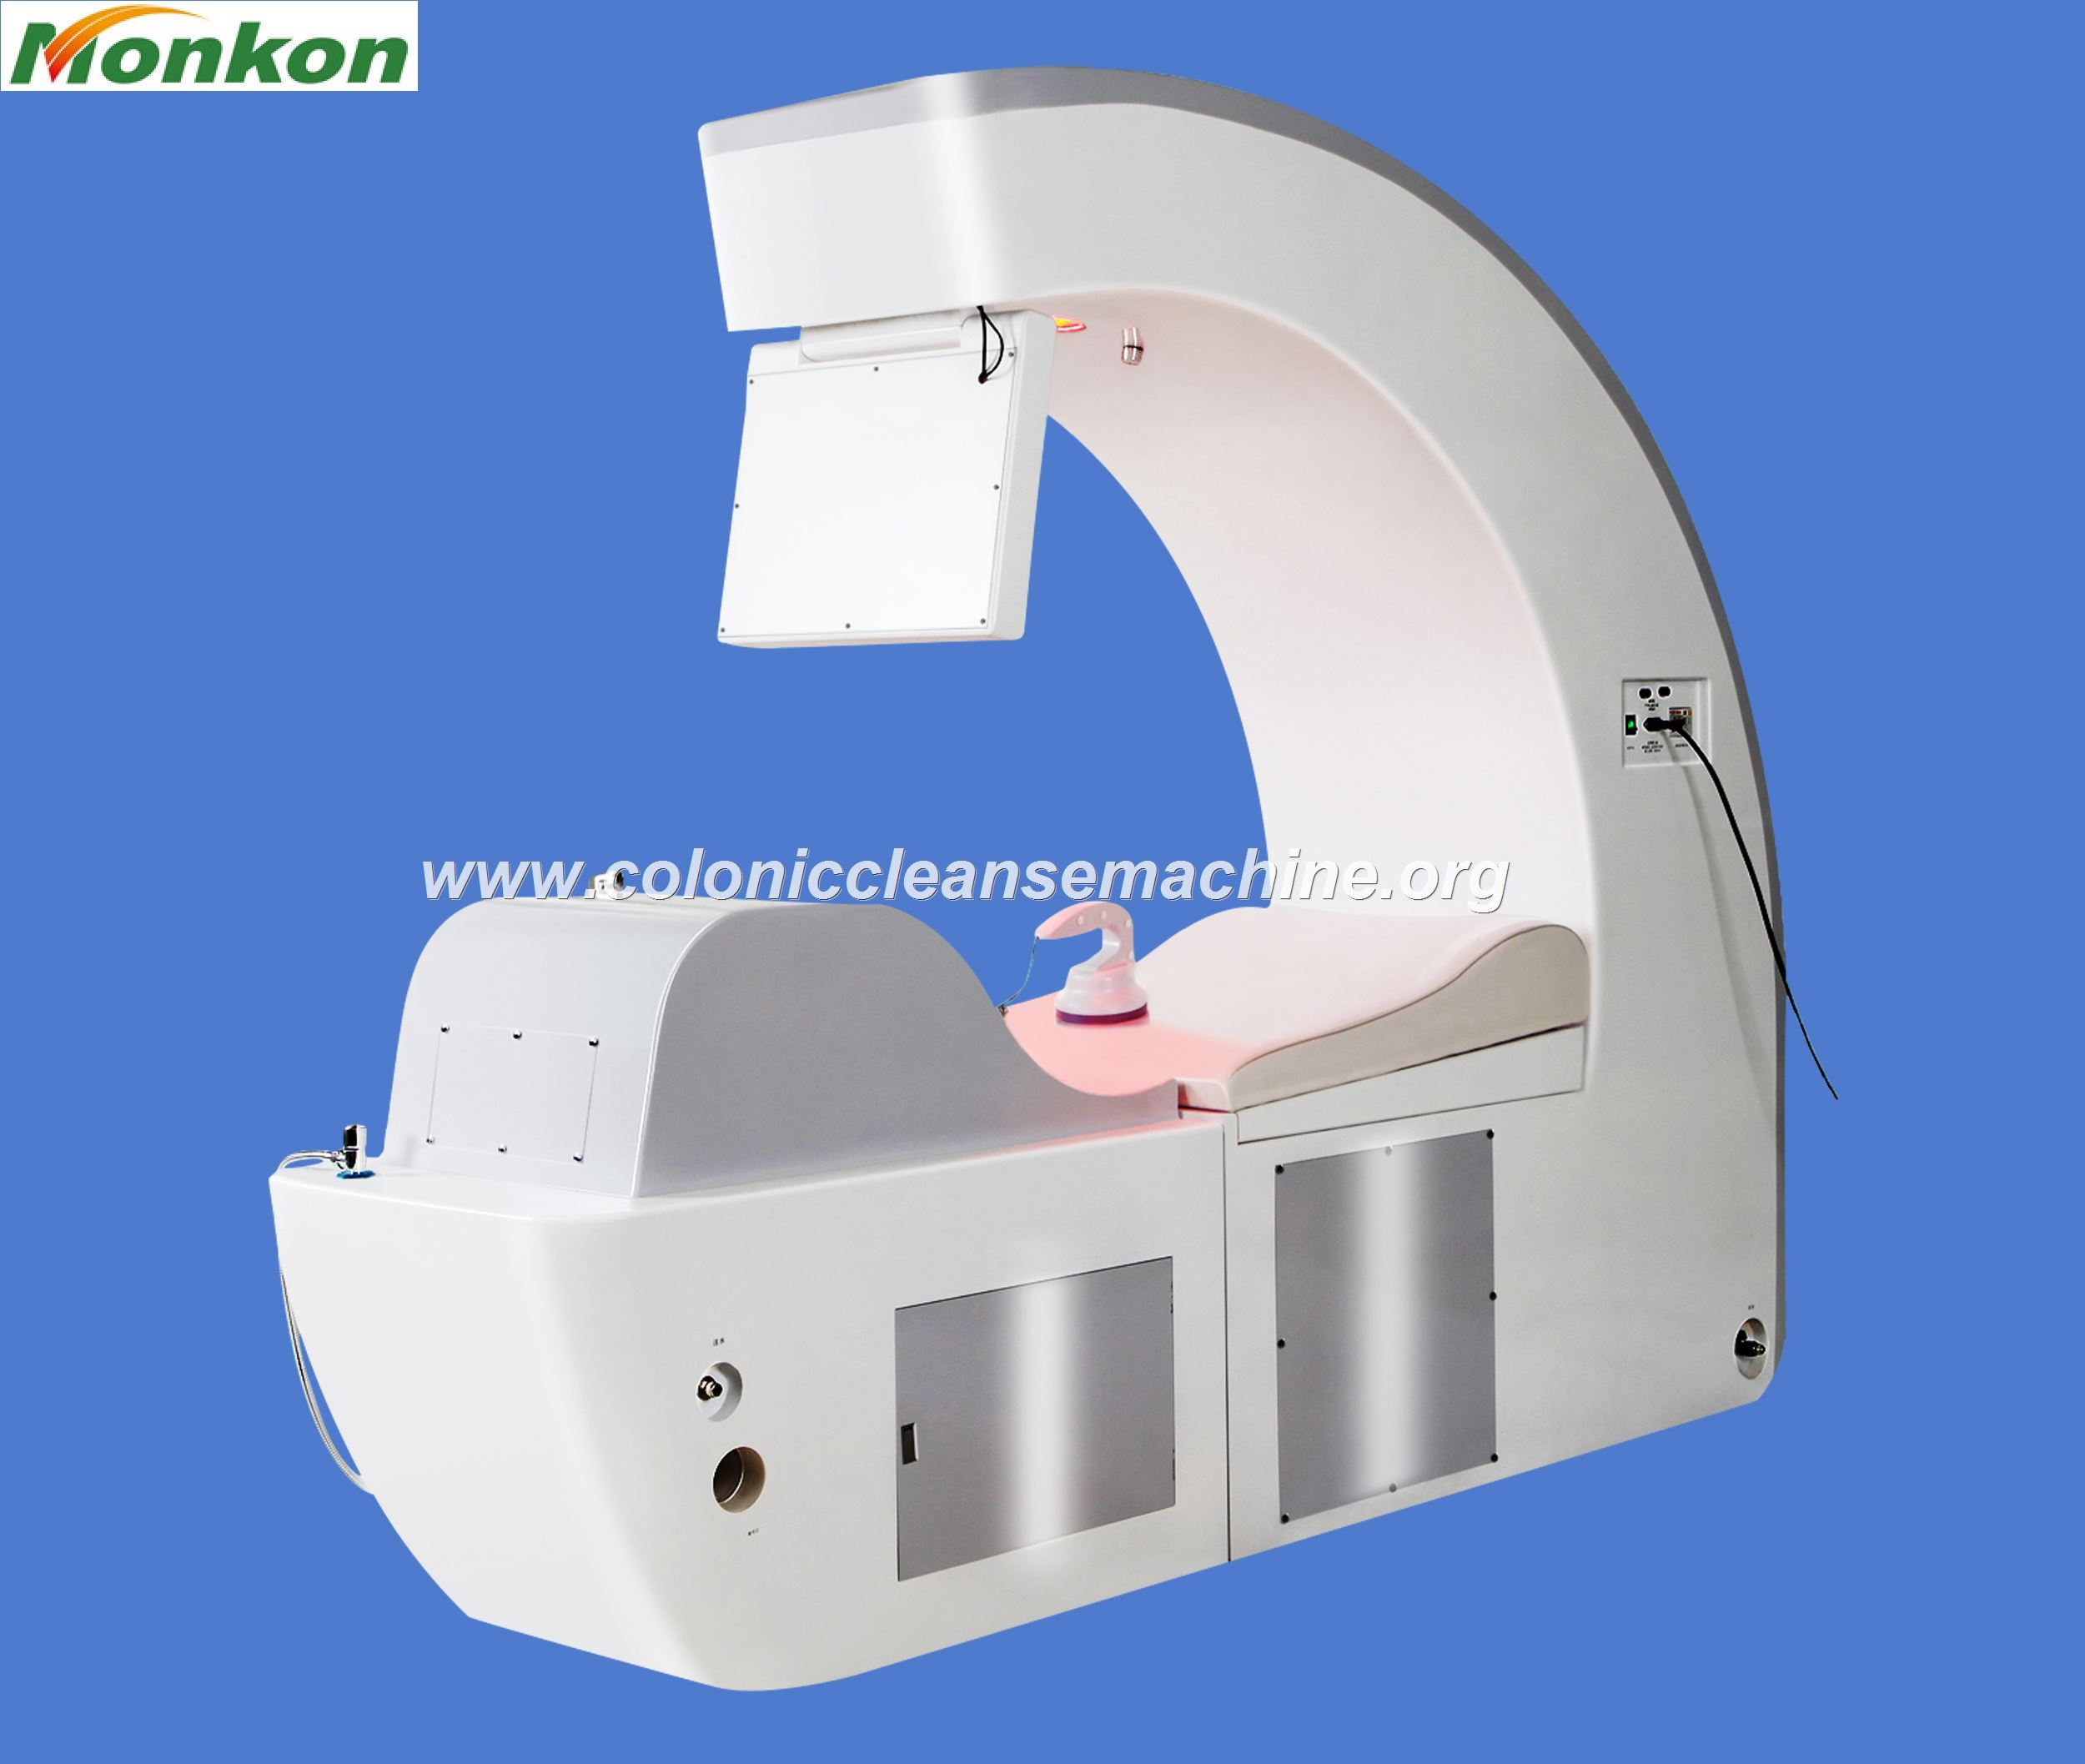 Colon Flush Machine and How It Works